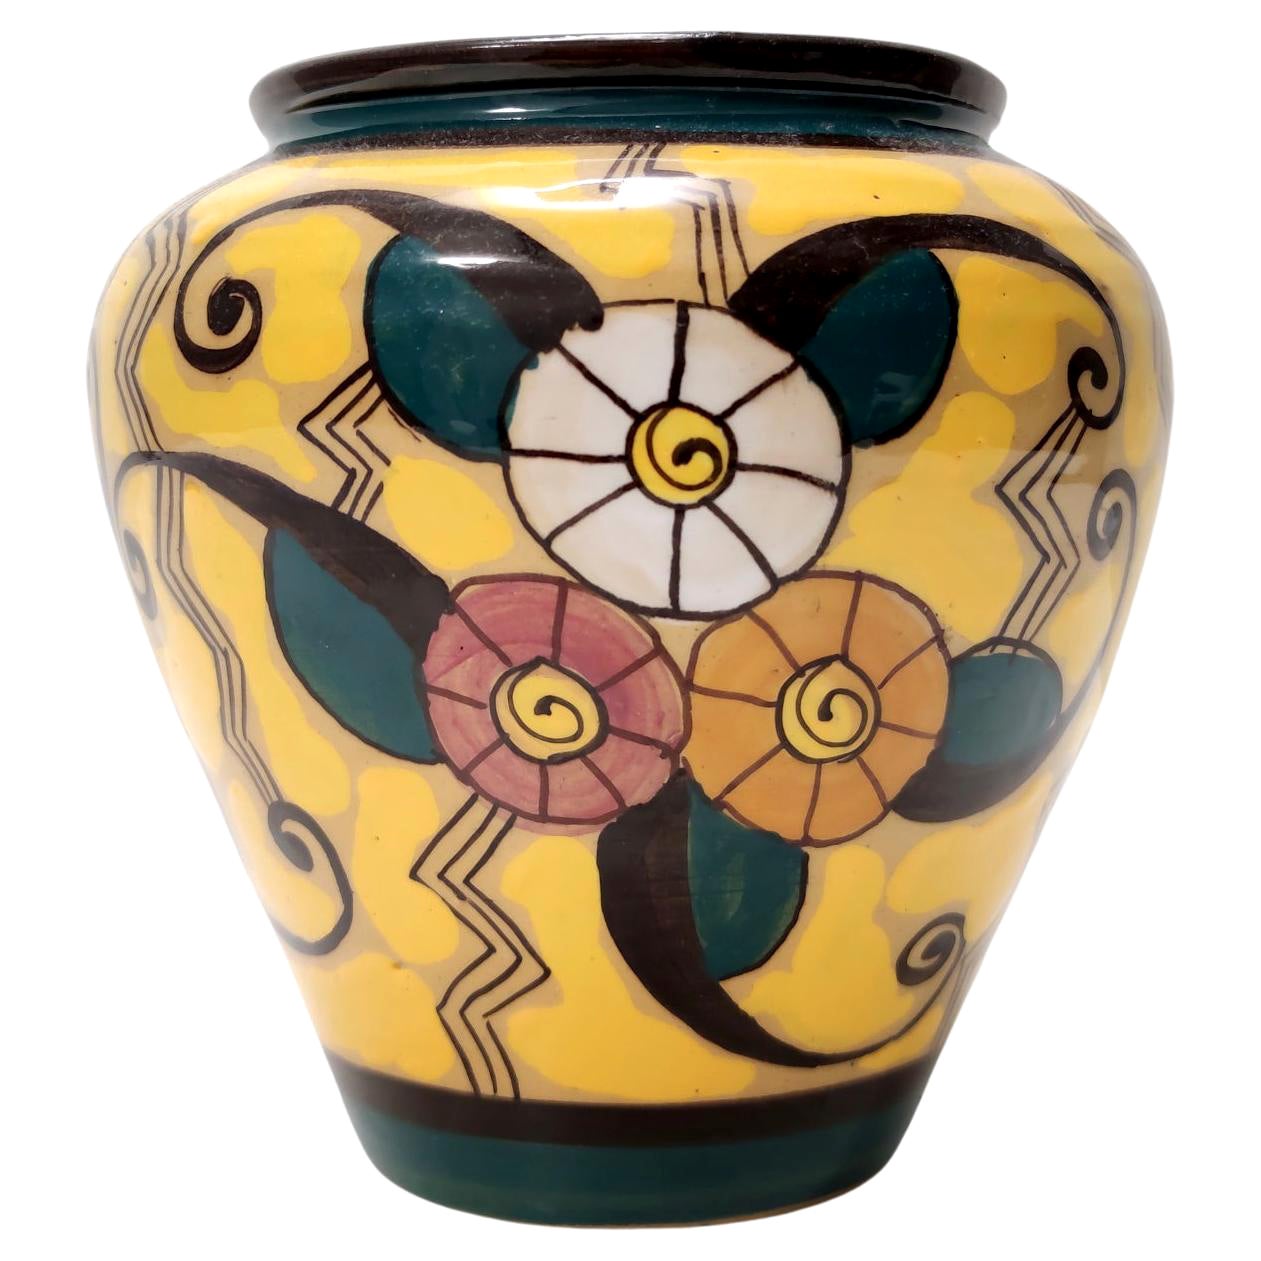 Futurist Yellow Glazed Earthenware Vase with Floral Motifs, Italy